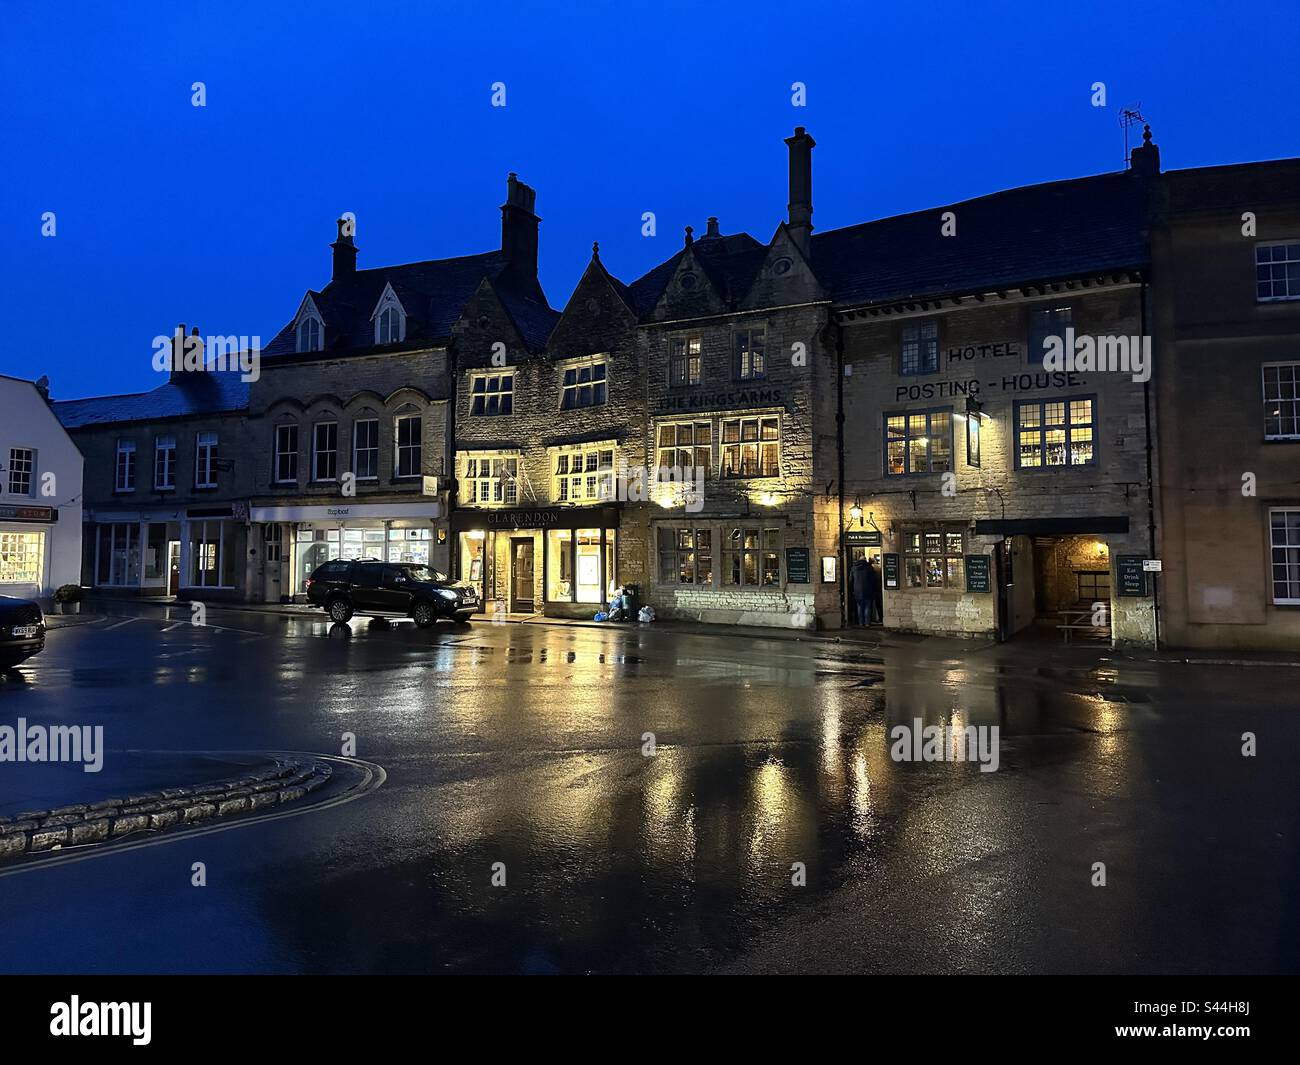 Market square and the Kings Arms hotel in Stow on the Wold at night Stock Photo